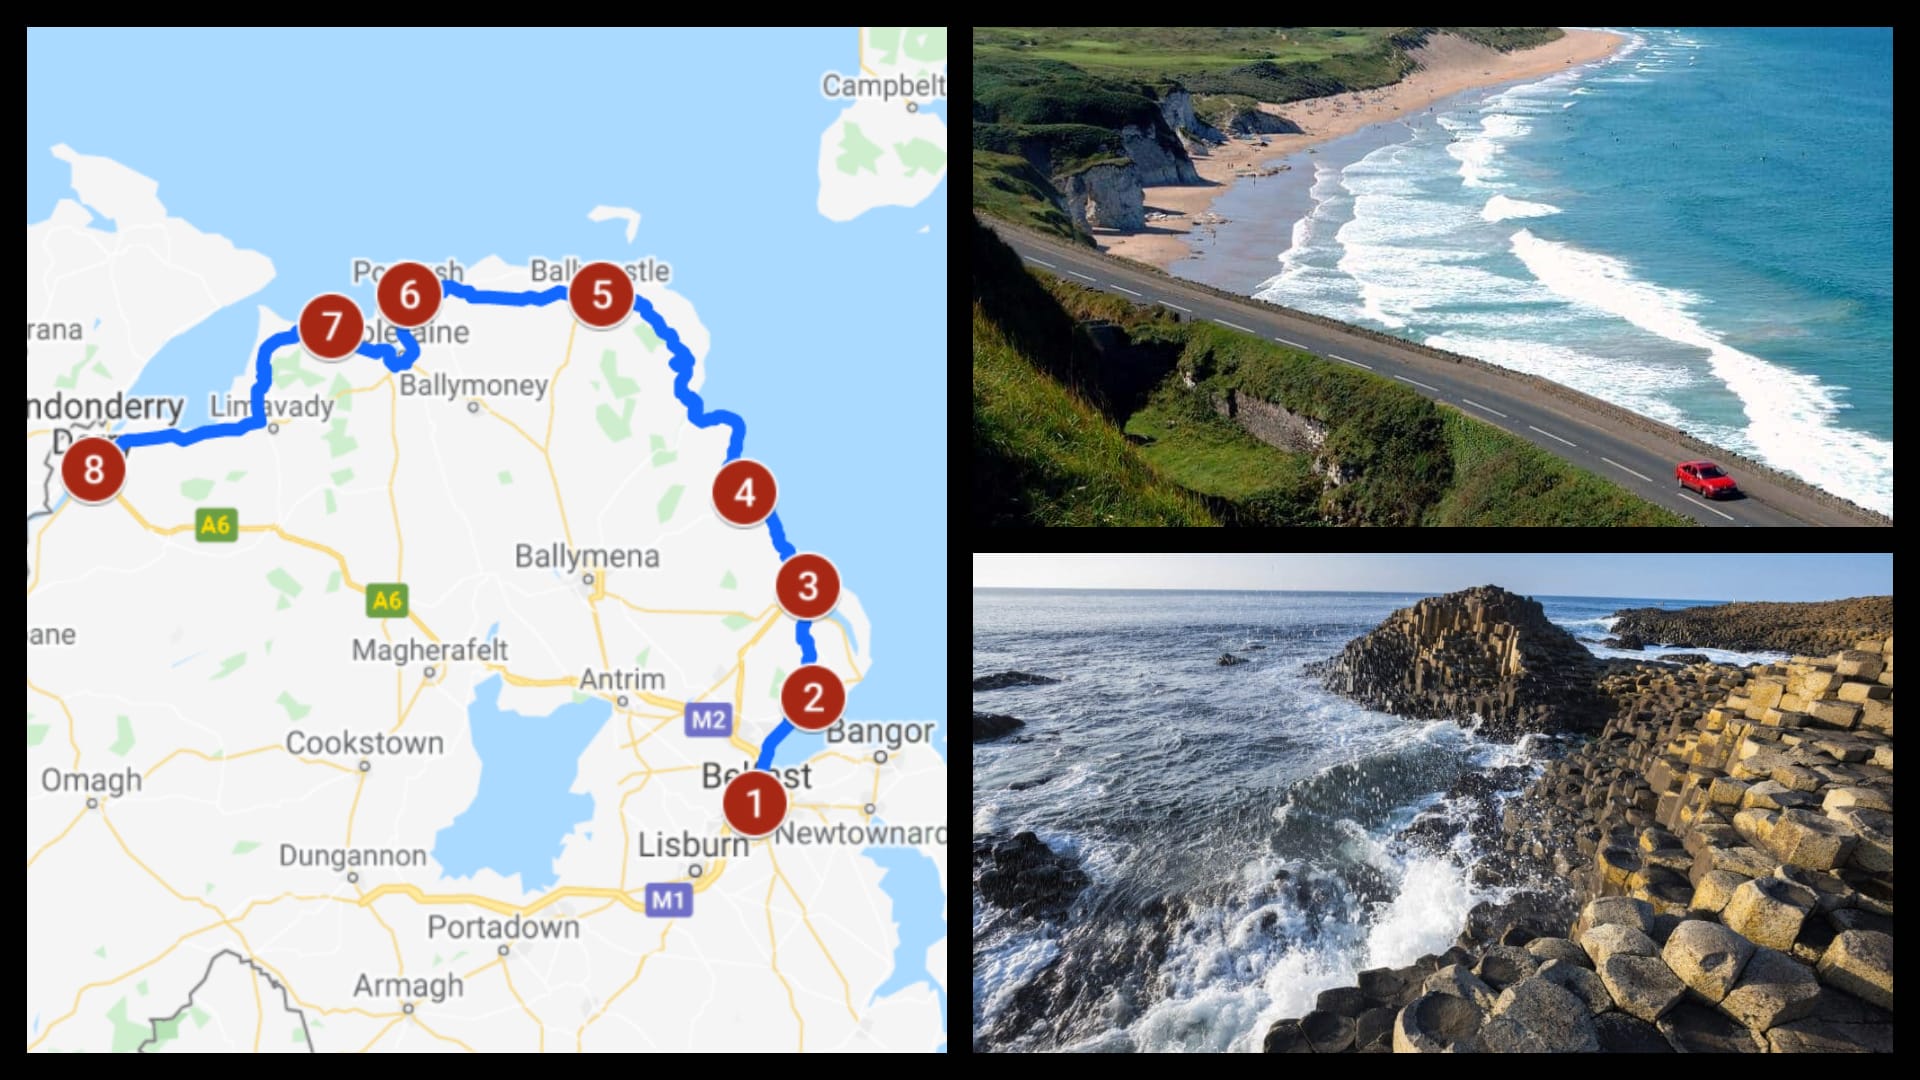 Causeway Coastal Route: WHEN to visit, what to SEE, and things to know